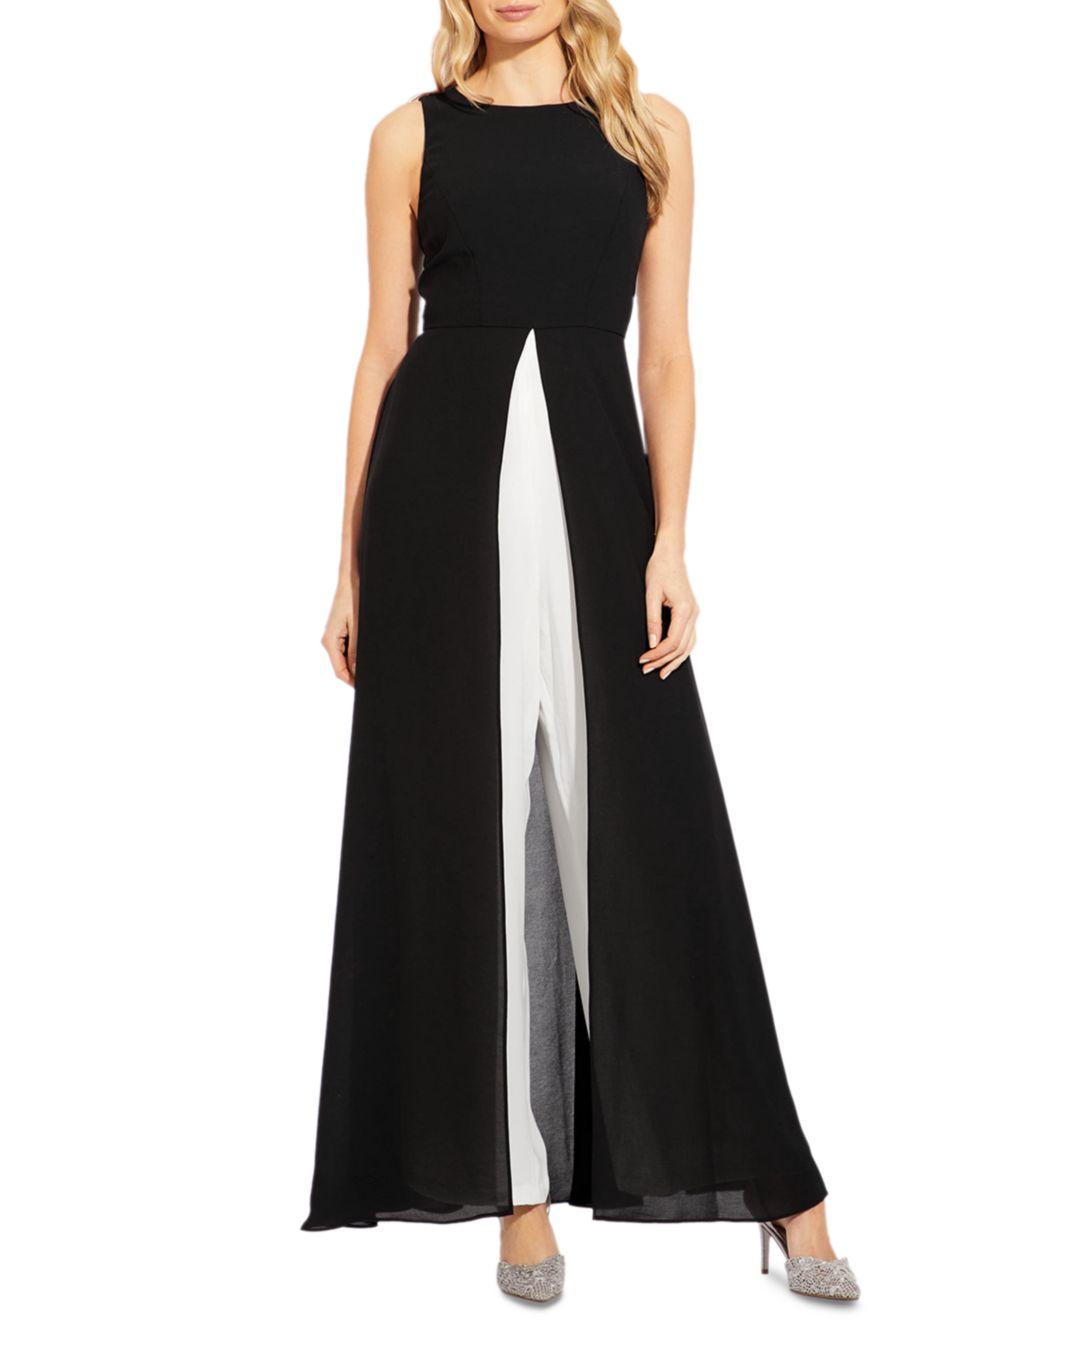 Adrianna Papell Synthetic Colorblocked Overlay Jumpsuit in Black 